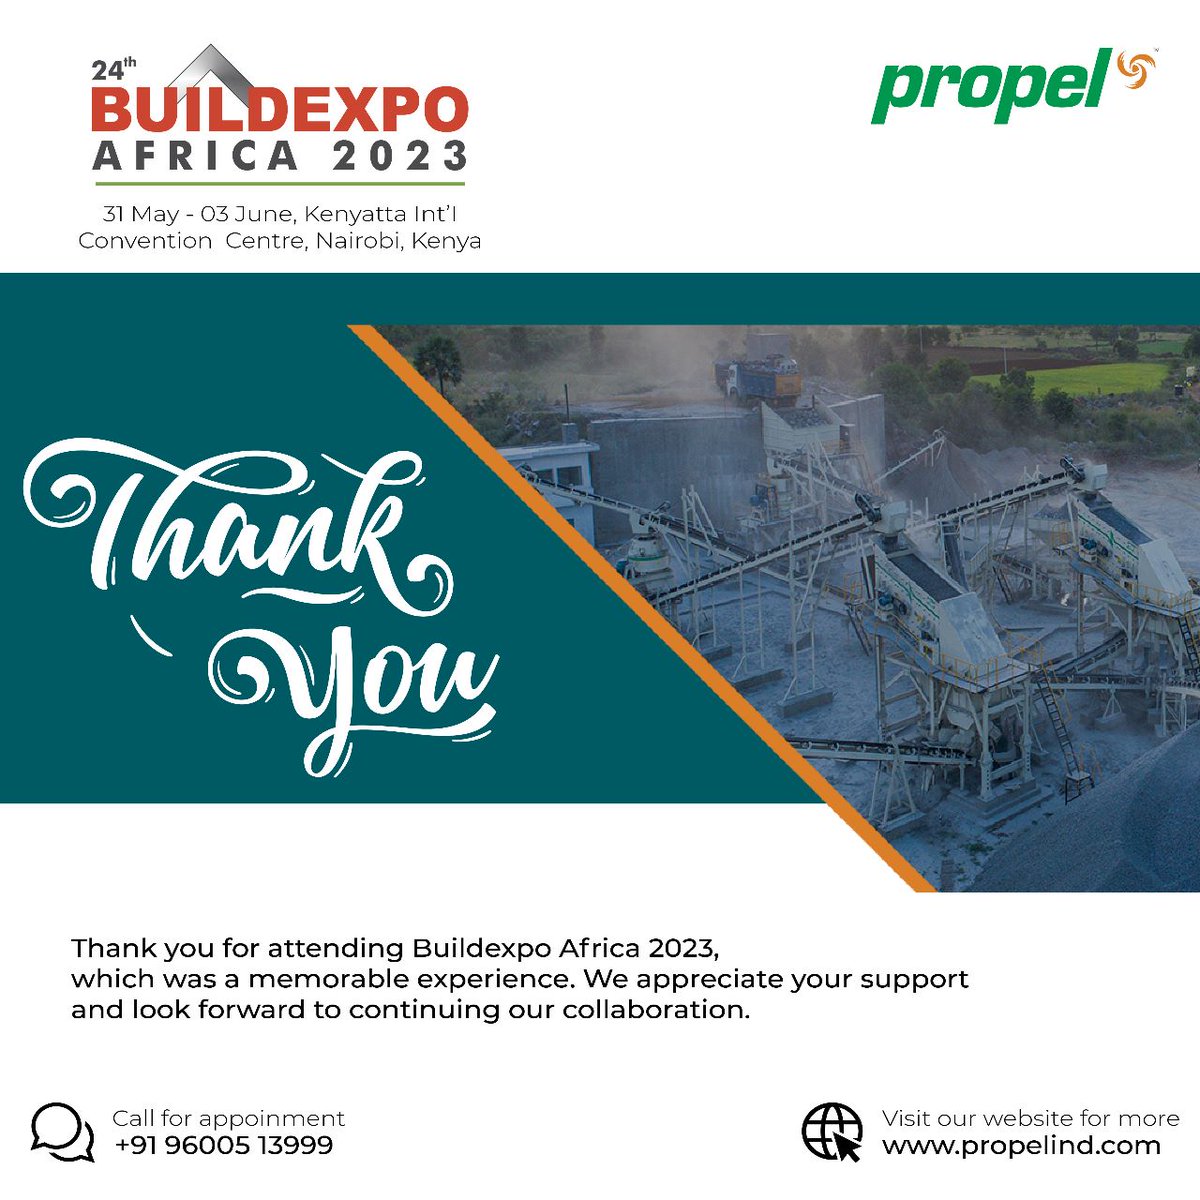 Thank you for attending Build expo Africa 2023, which was a memorable experience. 

#Propel. Always Ahead.

You can call to reach us on +91 95006 49333

#Propelind #BuildExpoAfrica2023 #Buildexpo2023 #crushingequipments #screeningequipments #propelatkenya #kenya #thankyou